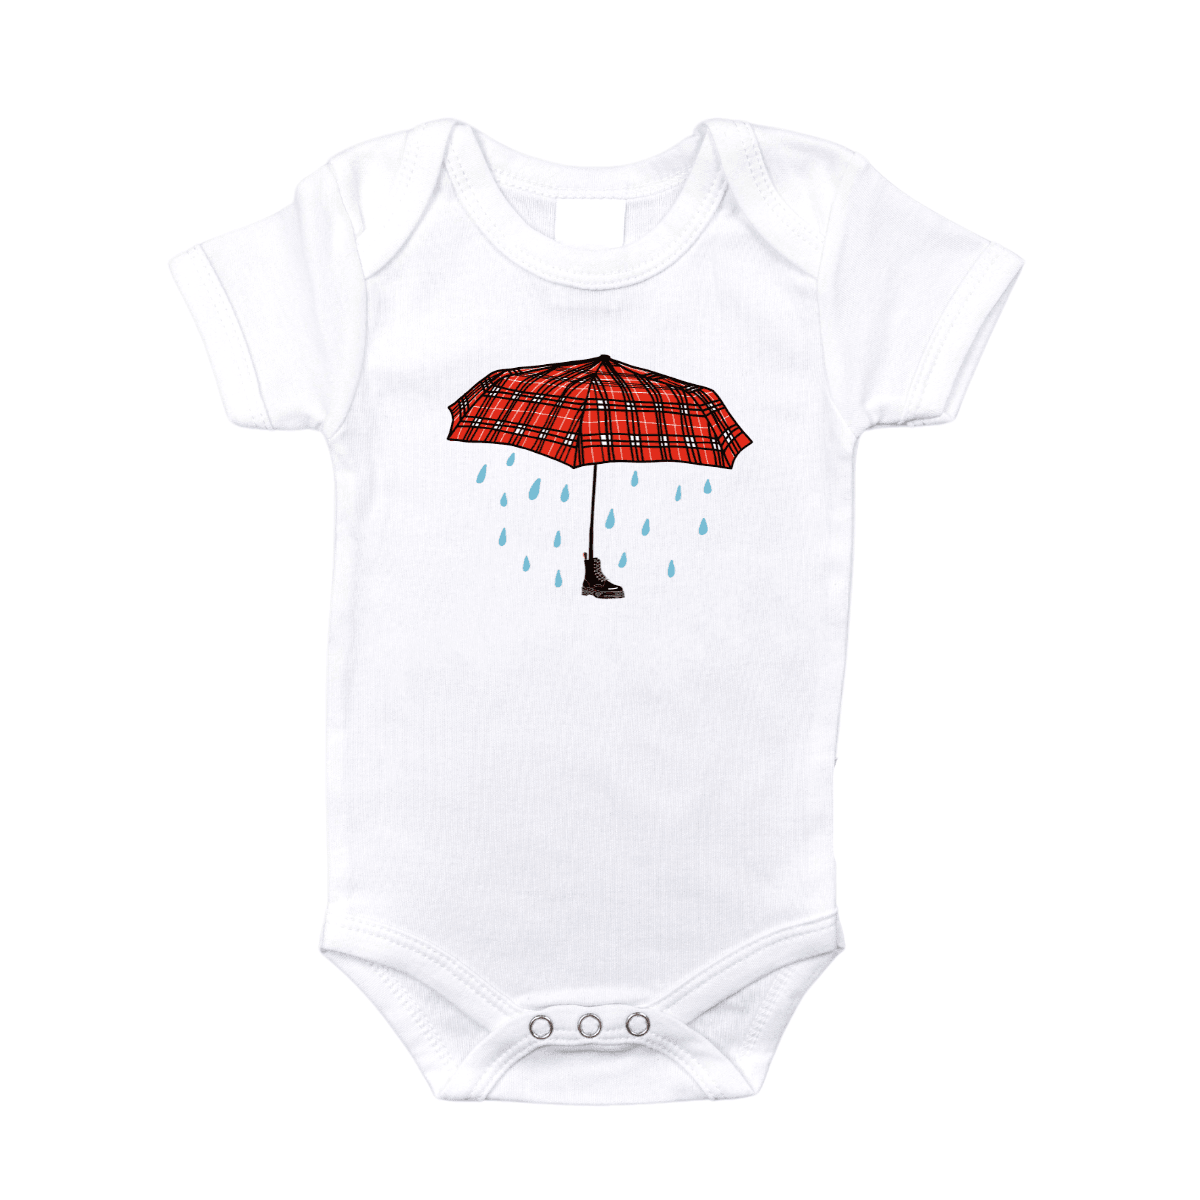 Baby onesie with "Seattle Grunge" text, featuring a guitar and raindrop design on a white background.